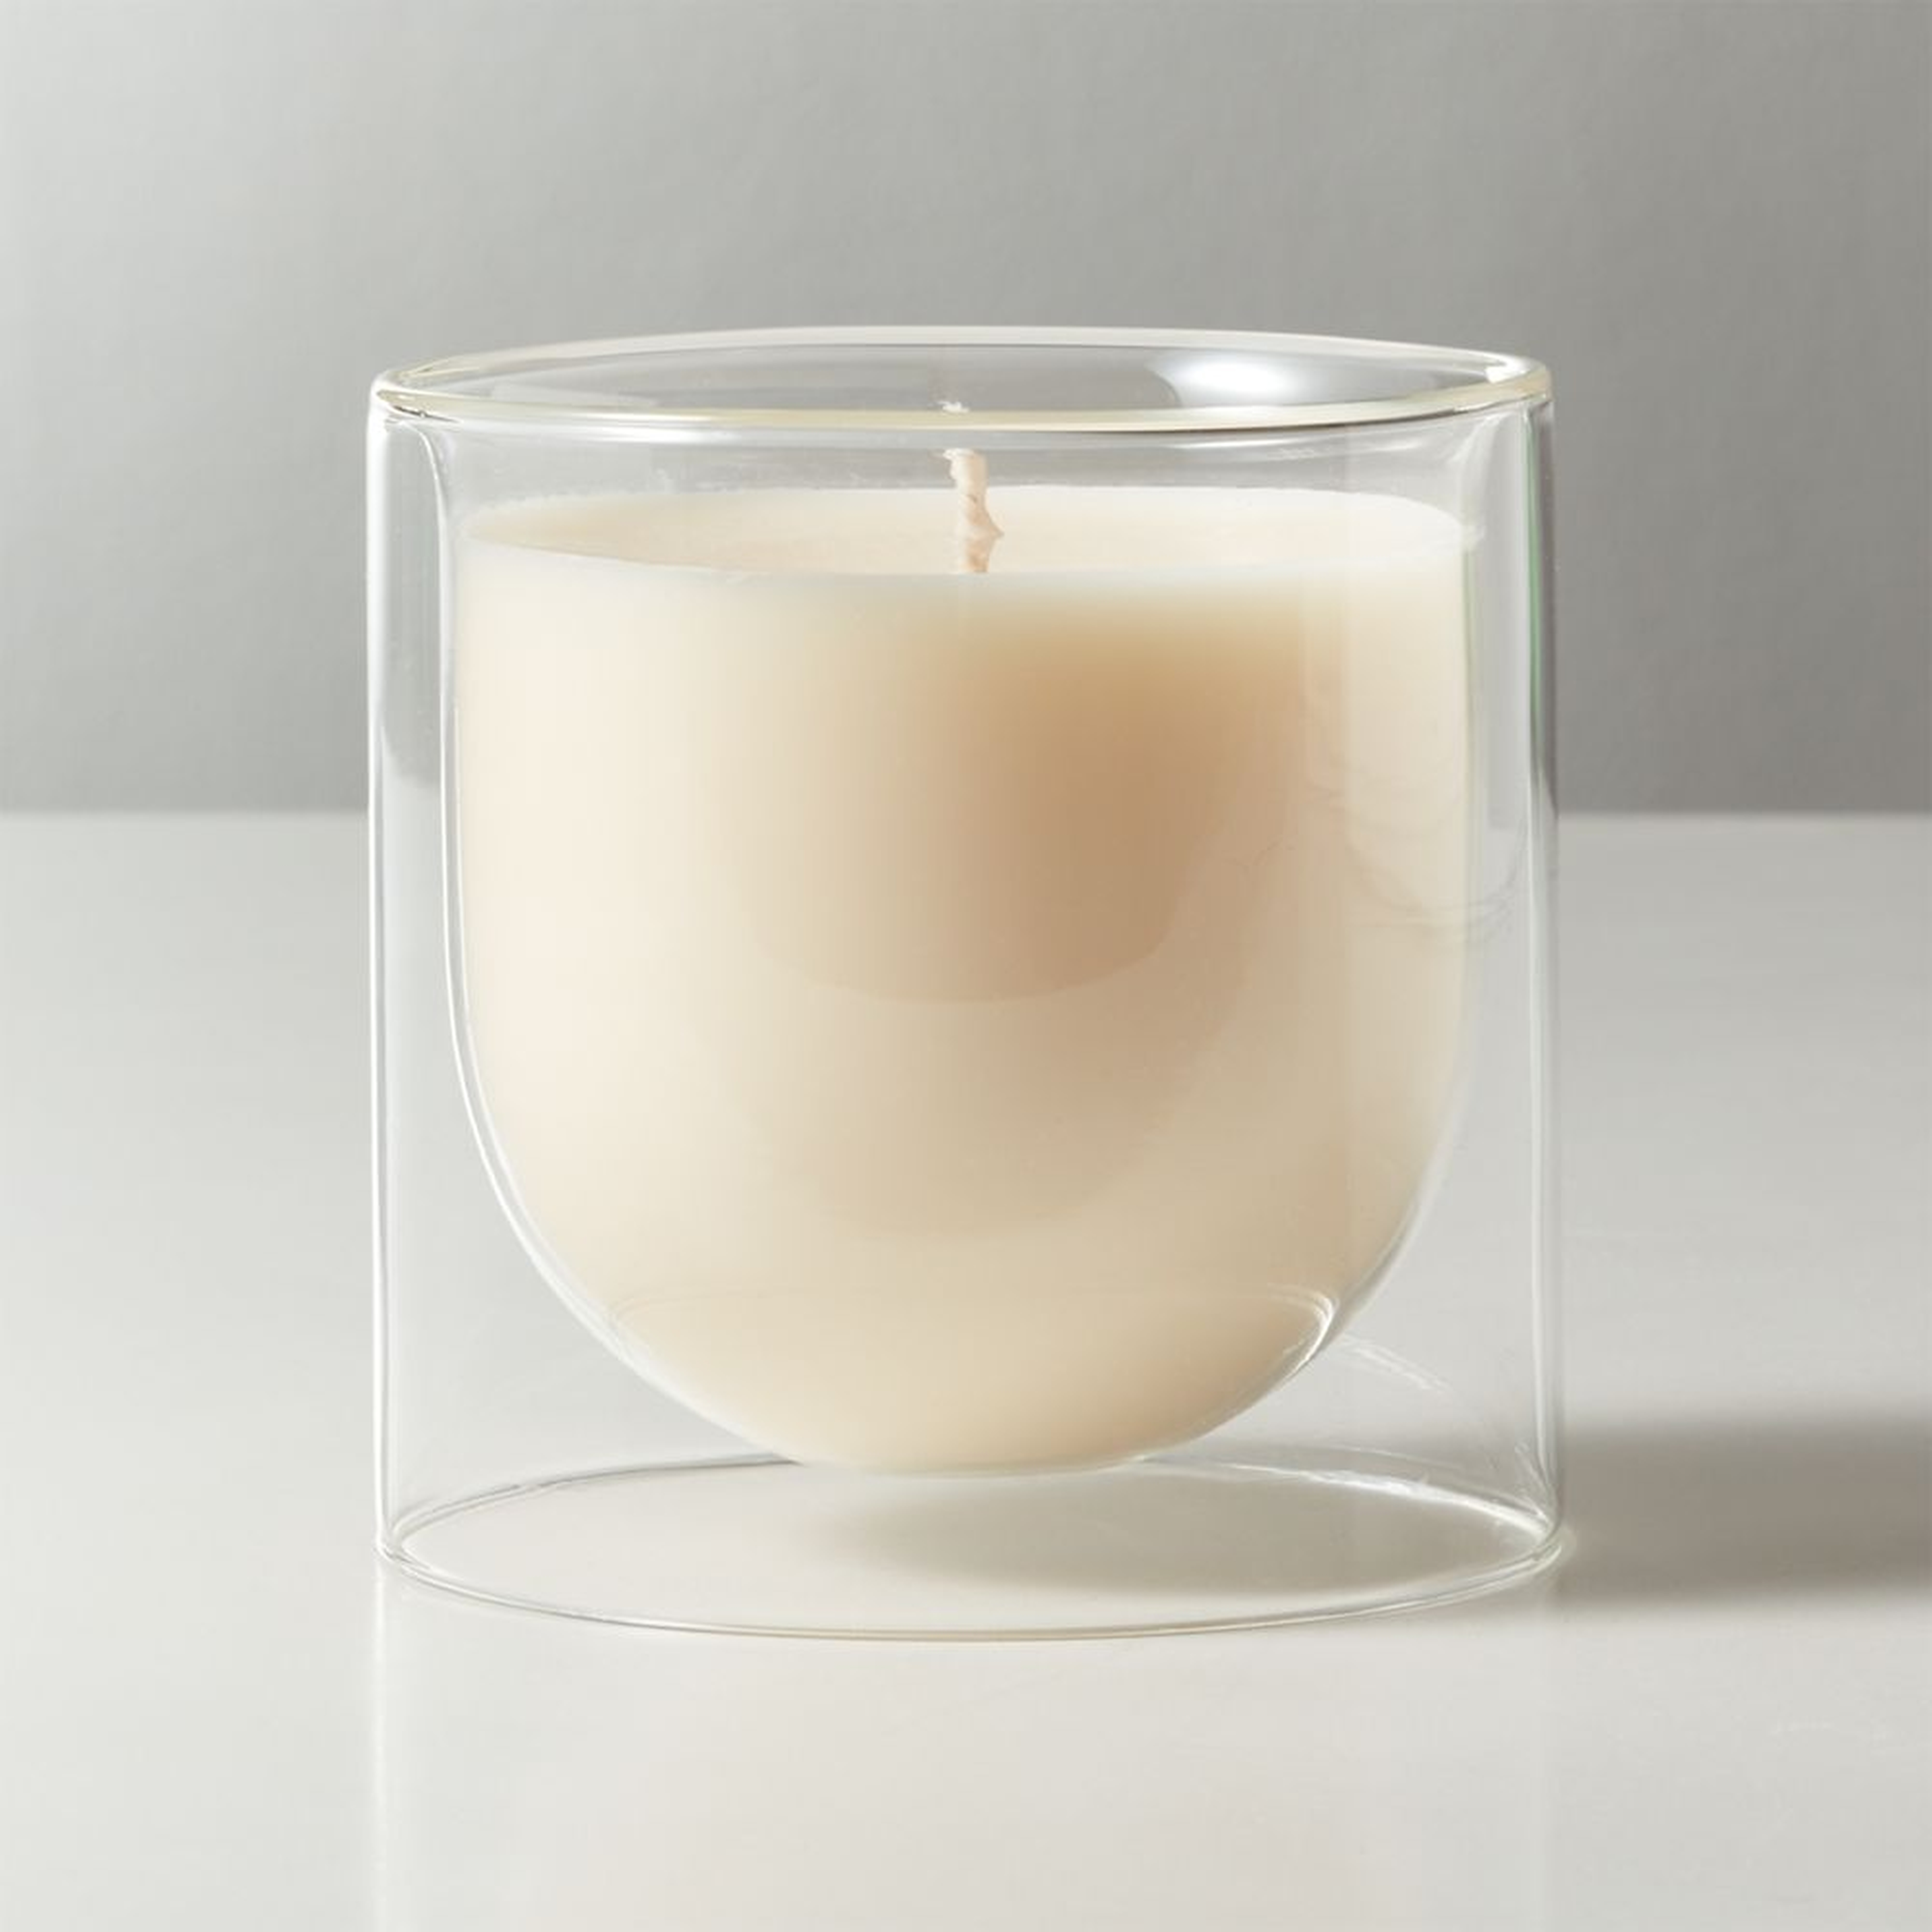 Bergamot and Fir Soy Candle - CB2